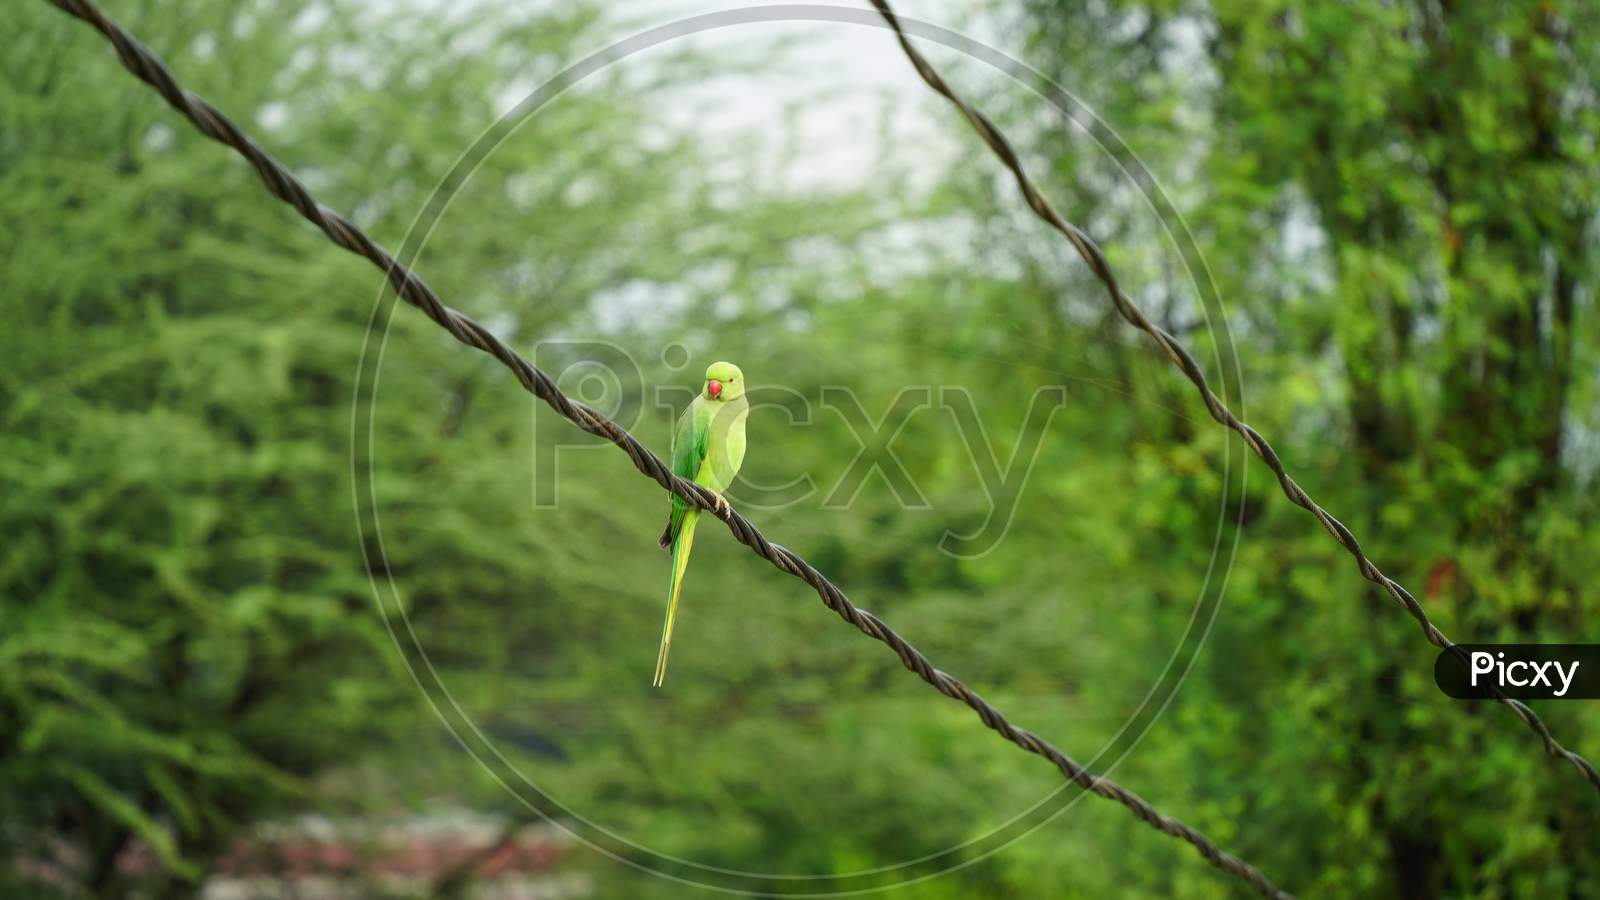 Awesome View Of Green Parrot Sitting On Iron Rope Alone.